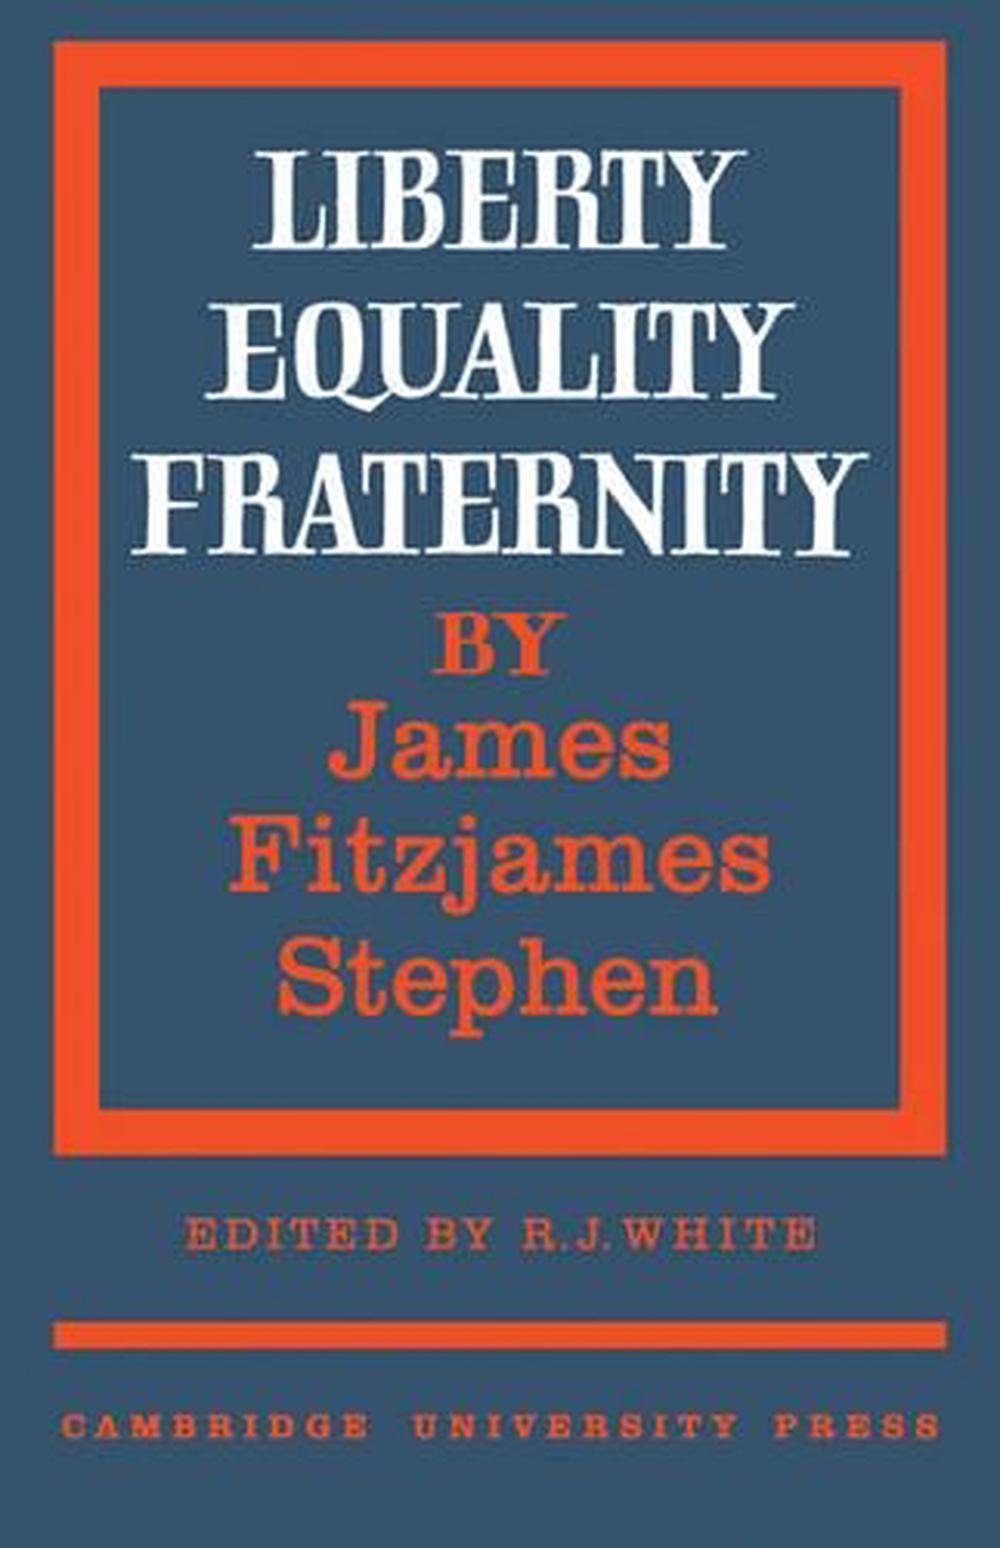 Liberty, Equality, Fraternity by James Fitzjames Stephen (English